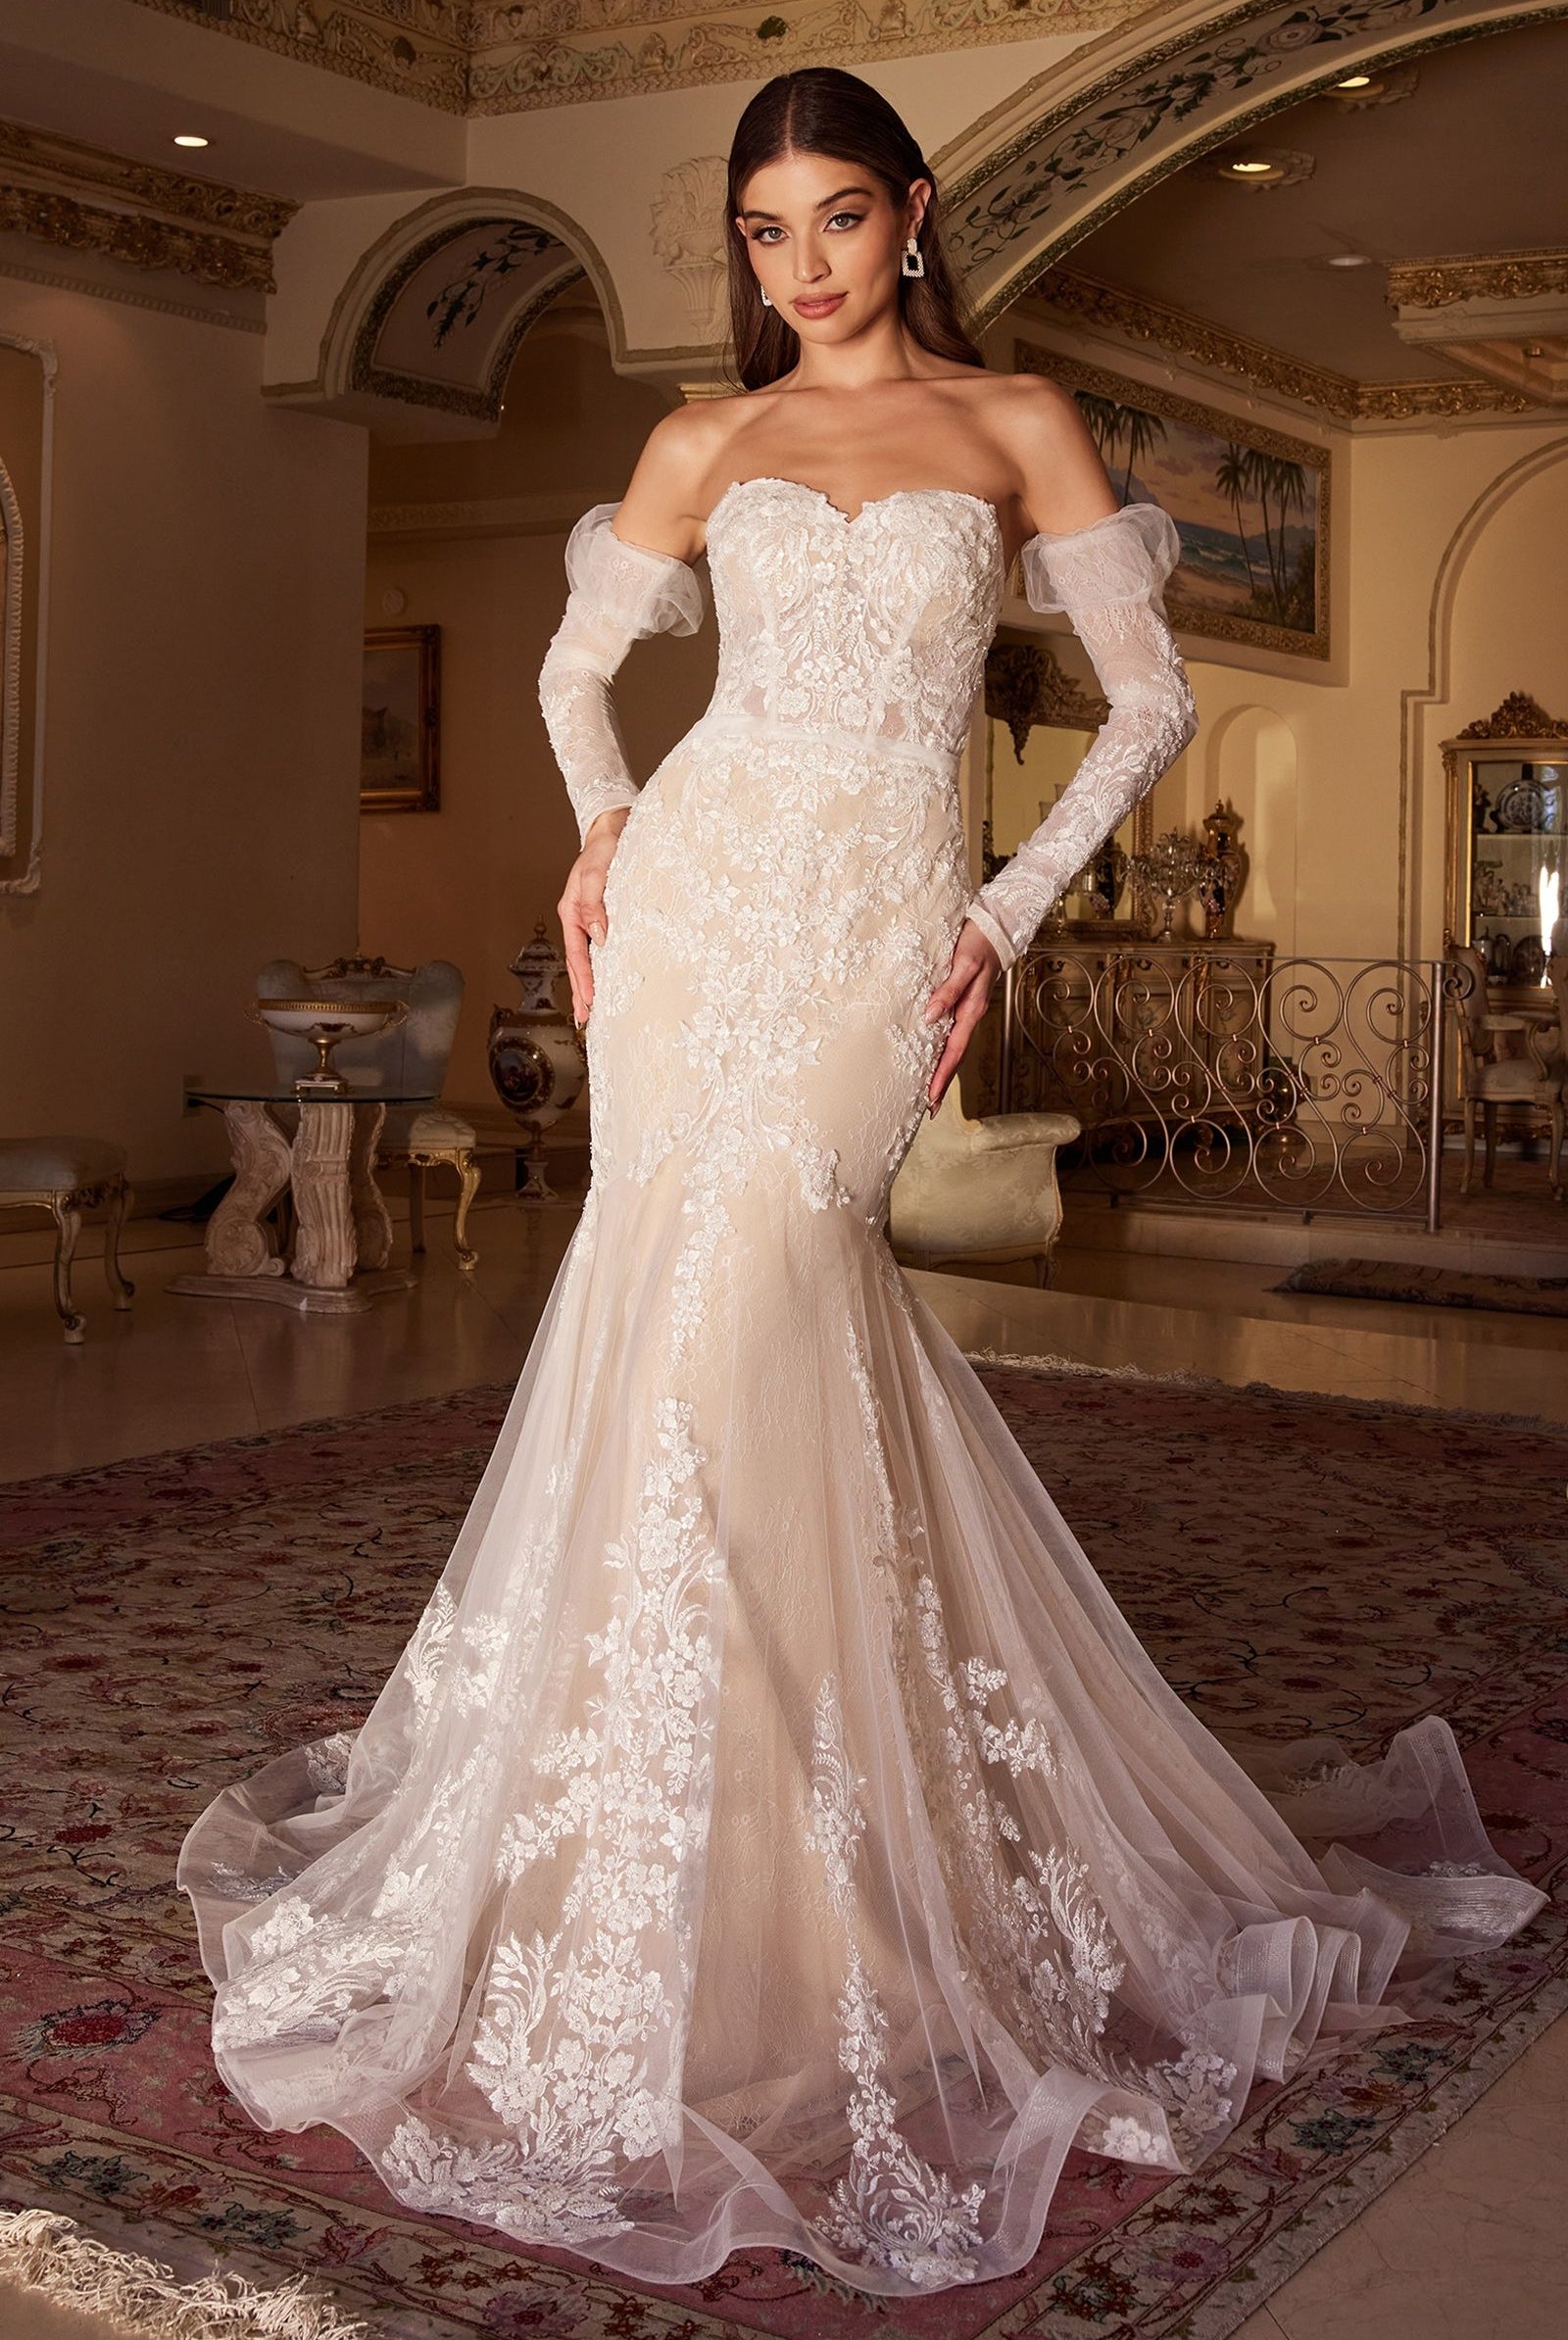 Bridal dress with removable sleeves